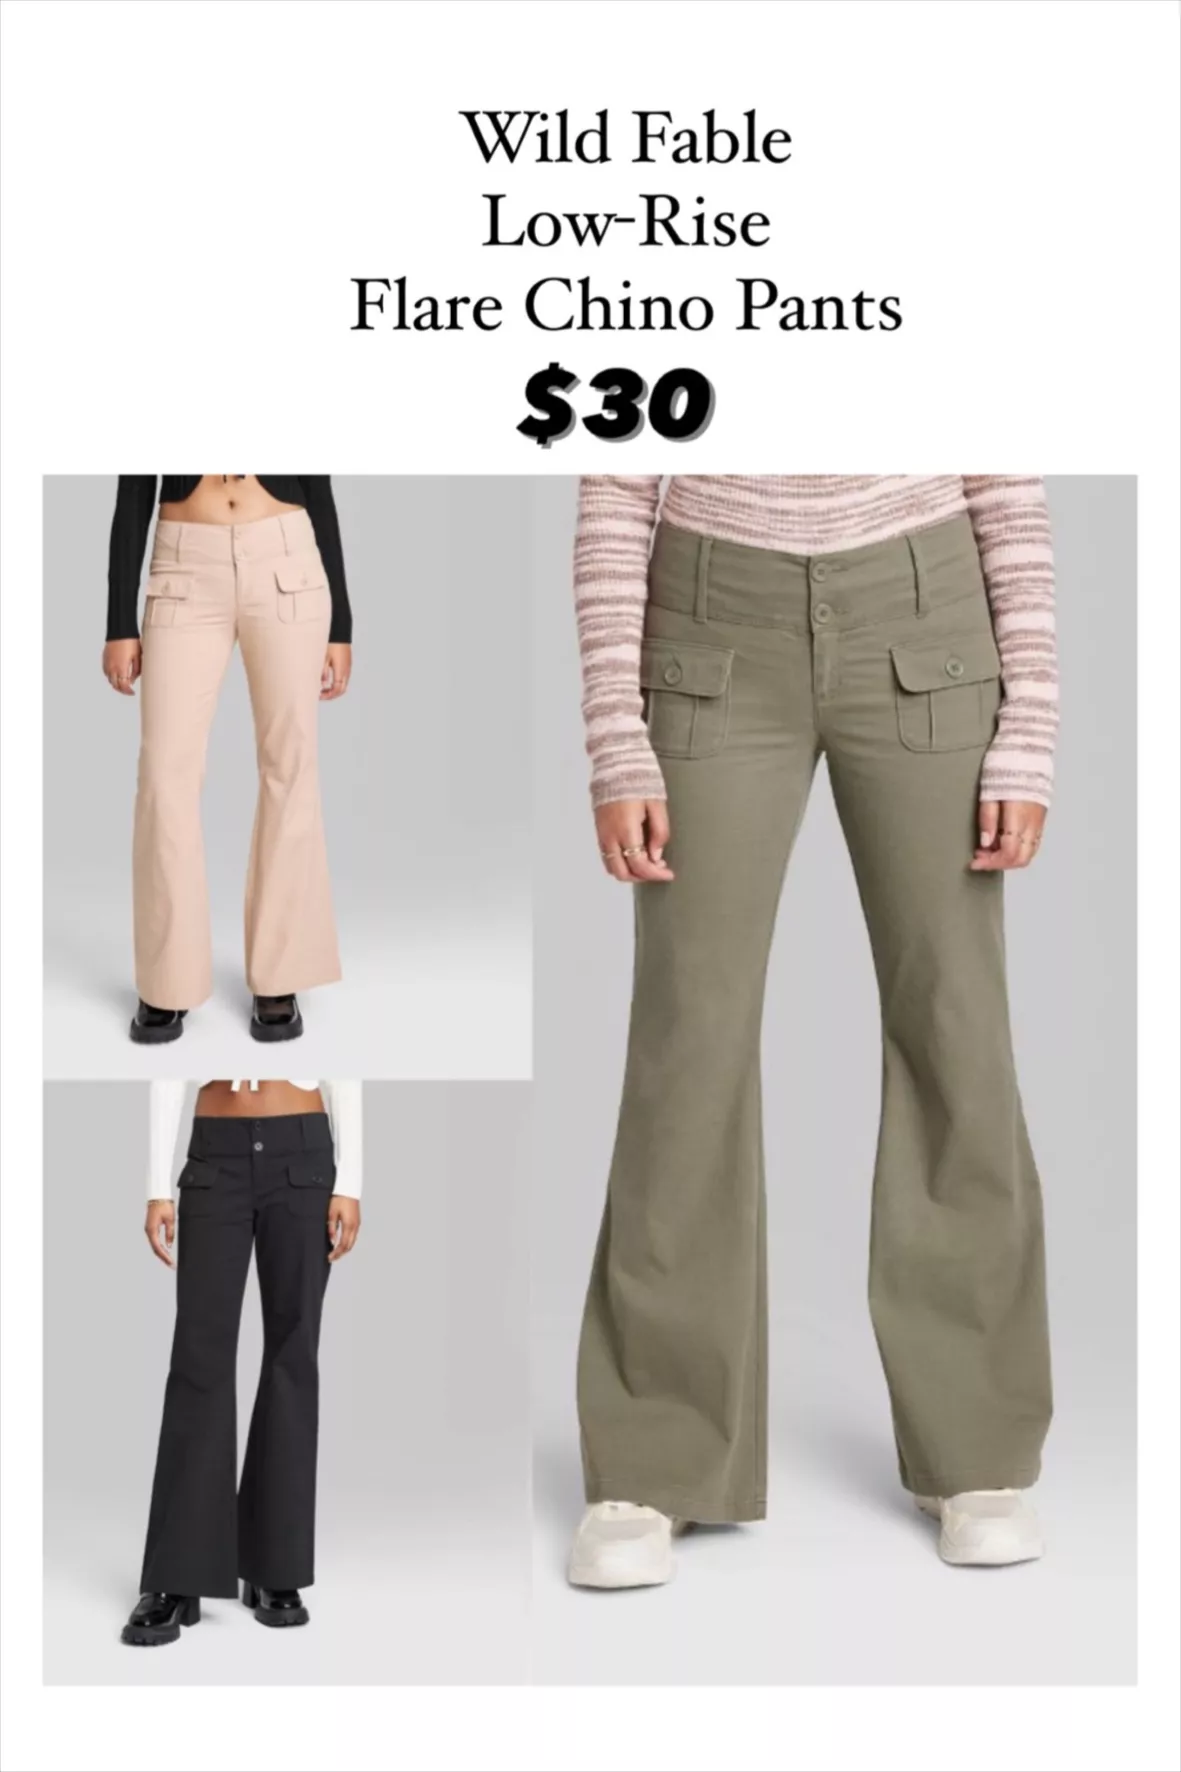 Women's Low-Rise Flare Chino Pants - Wild Fable Black 4